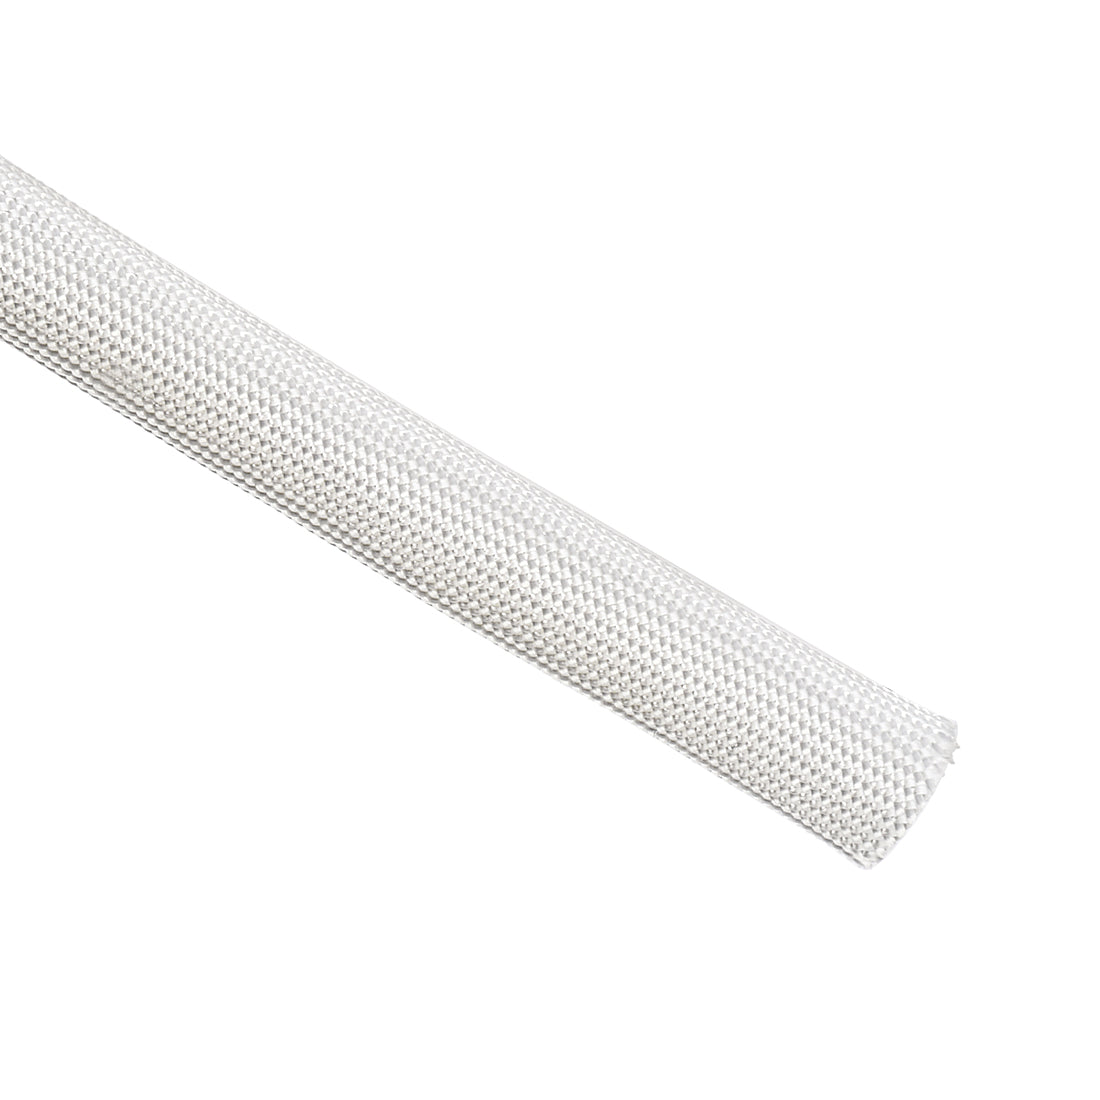 uxcell Uxcell Insulation Cable Protector, 33Ft-12mm High TEMP Fiberglass Sleeve White